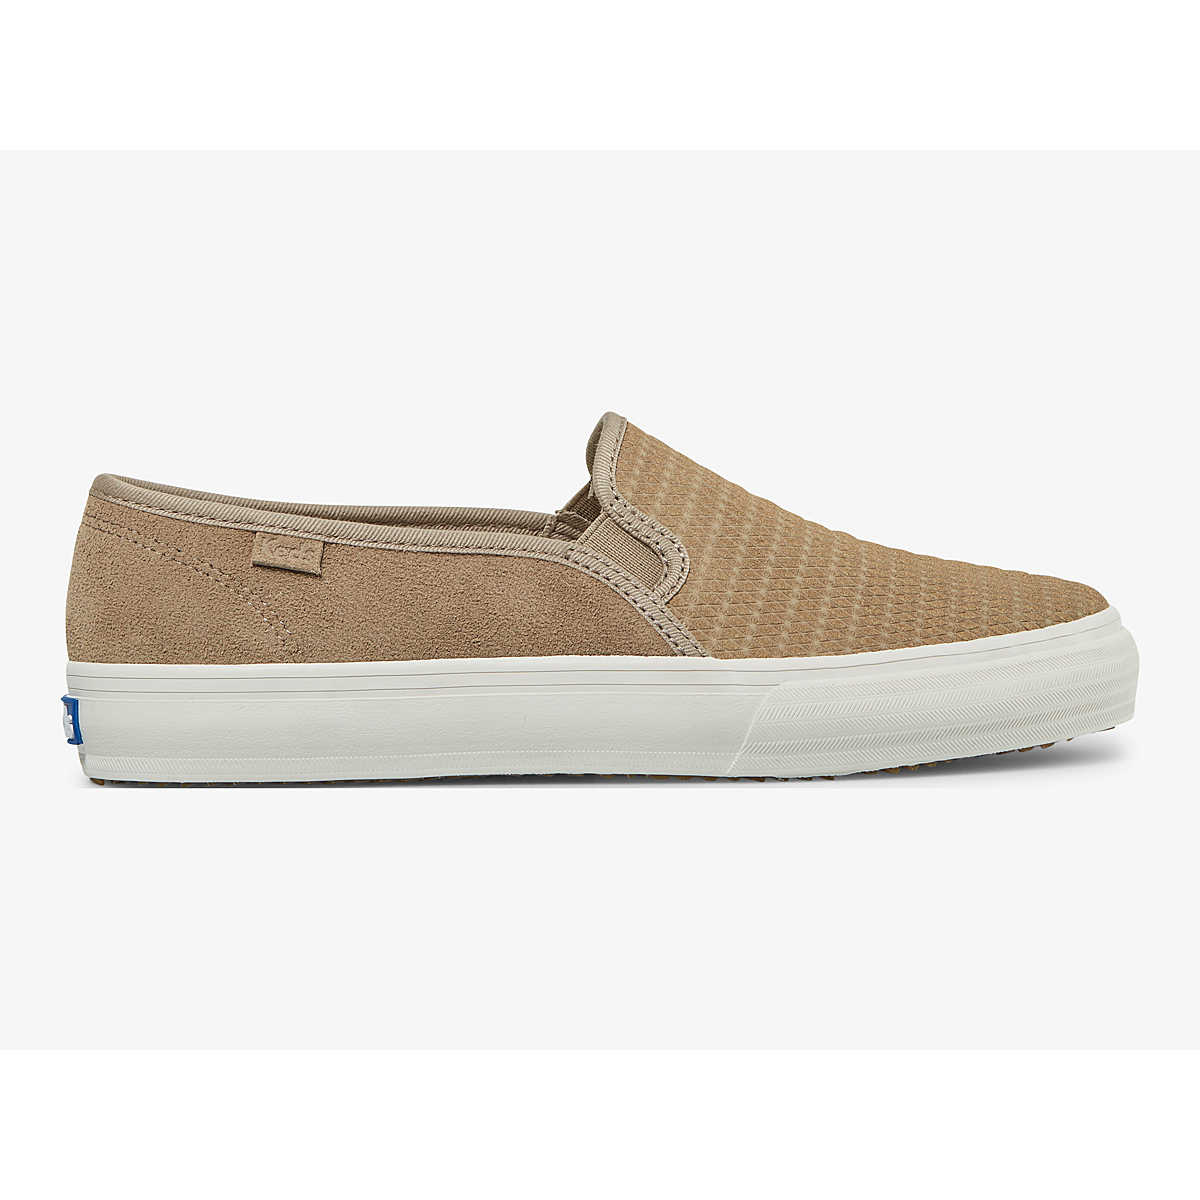 Keds Ked's Women's Double Decker Suede Taupe